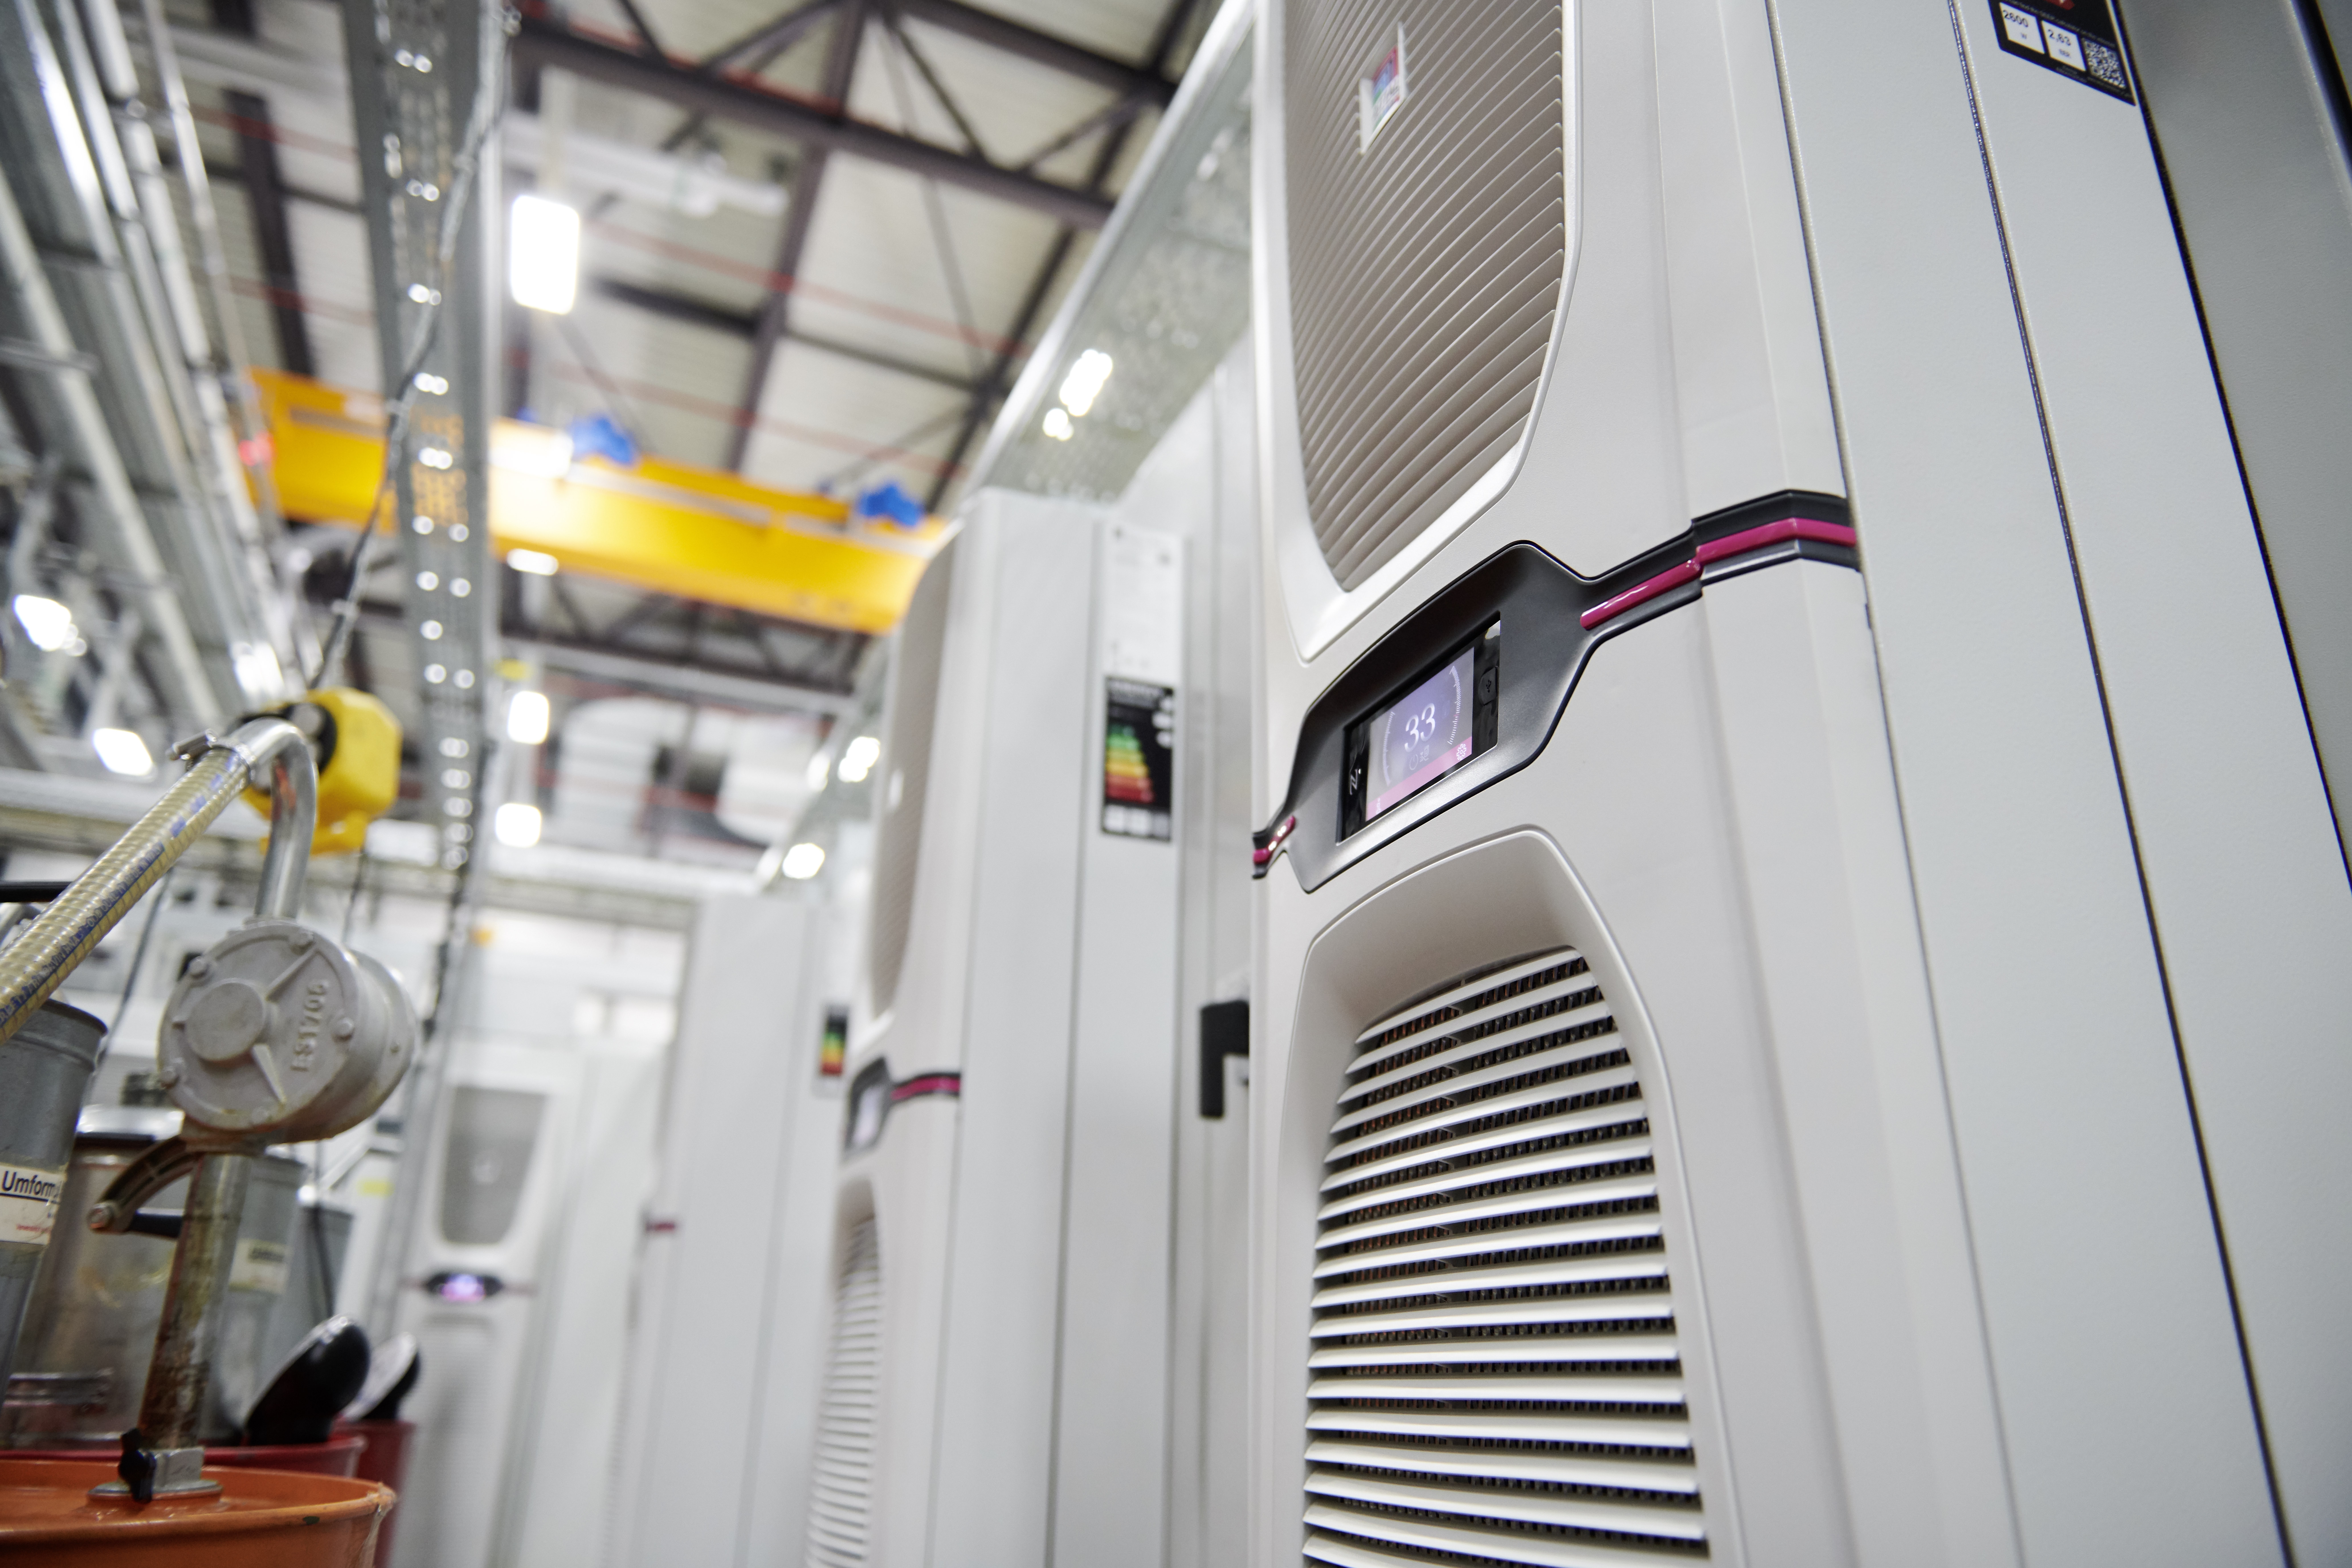 Benefits of Maintaining Cooling Equipment